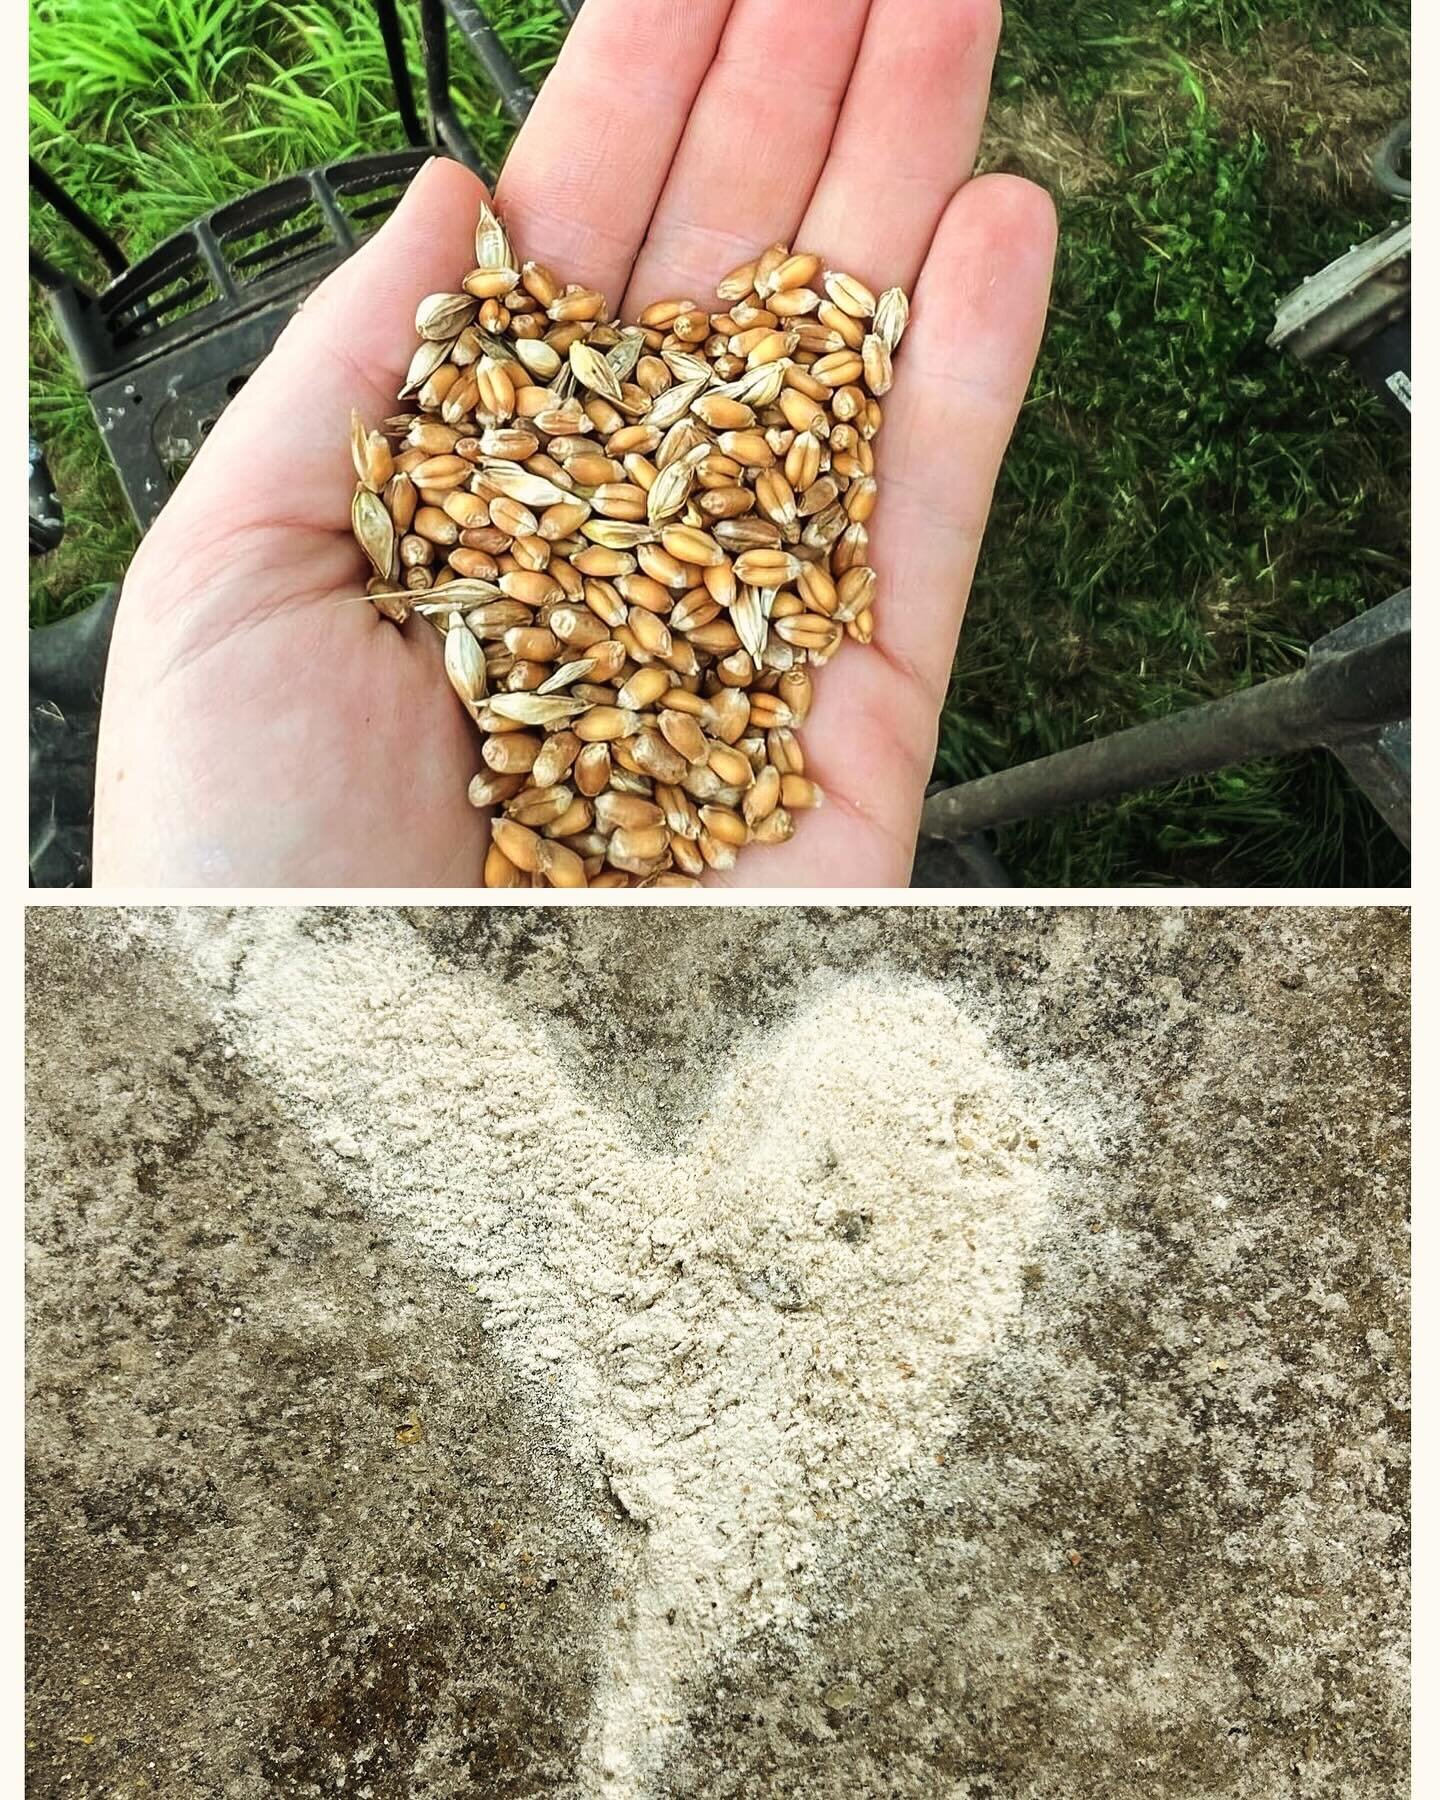 ❤️🌾🌽Spreading the local grains love is at the heart of everything we do here. Loving the small, local family farms we partner with who in turn love nature, working with it instead of against it. Loving the food producers that choose to use our flou